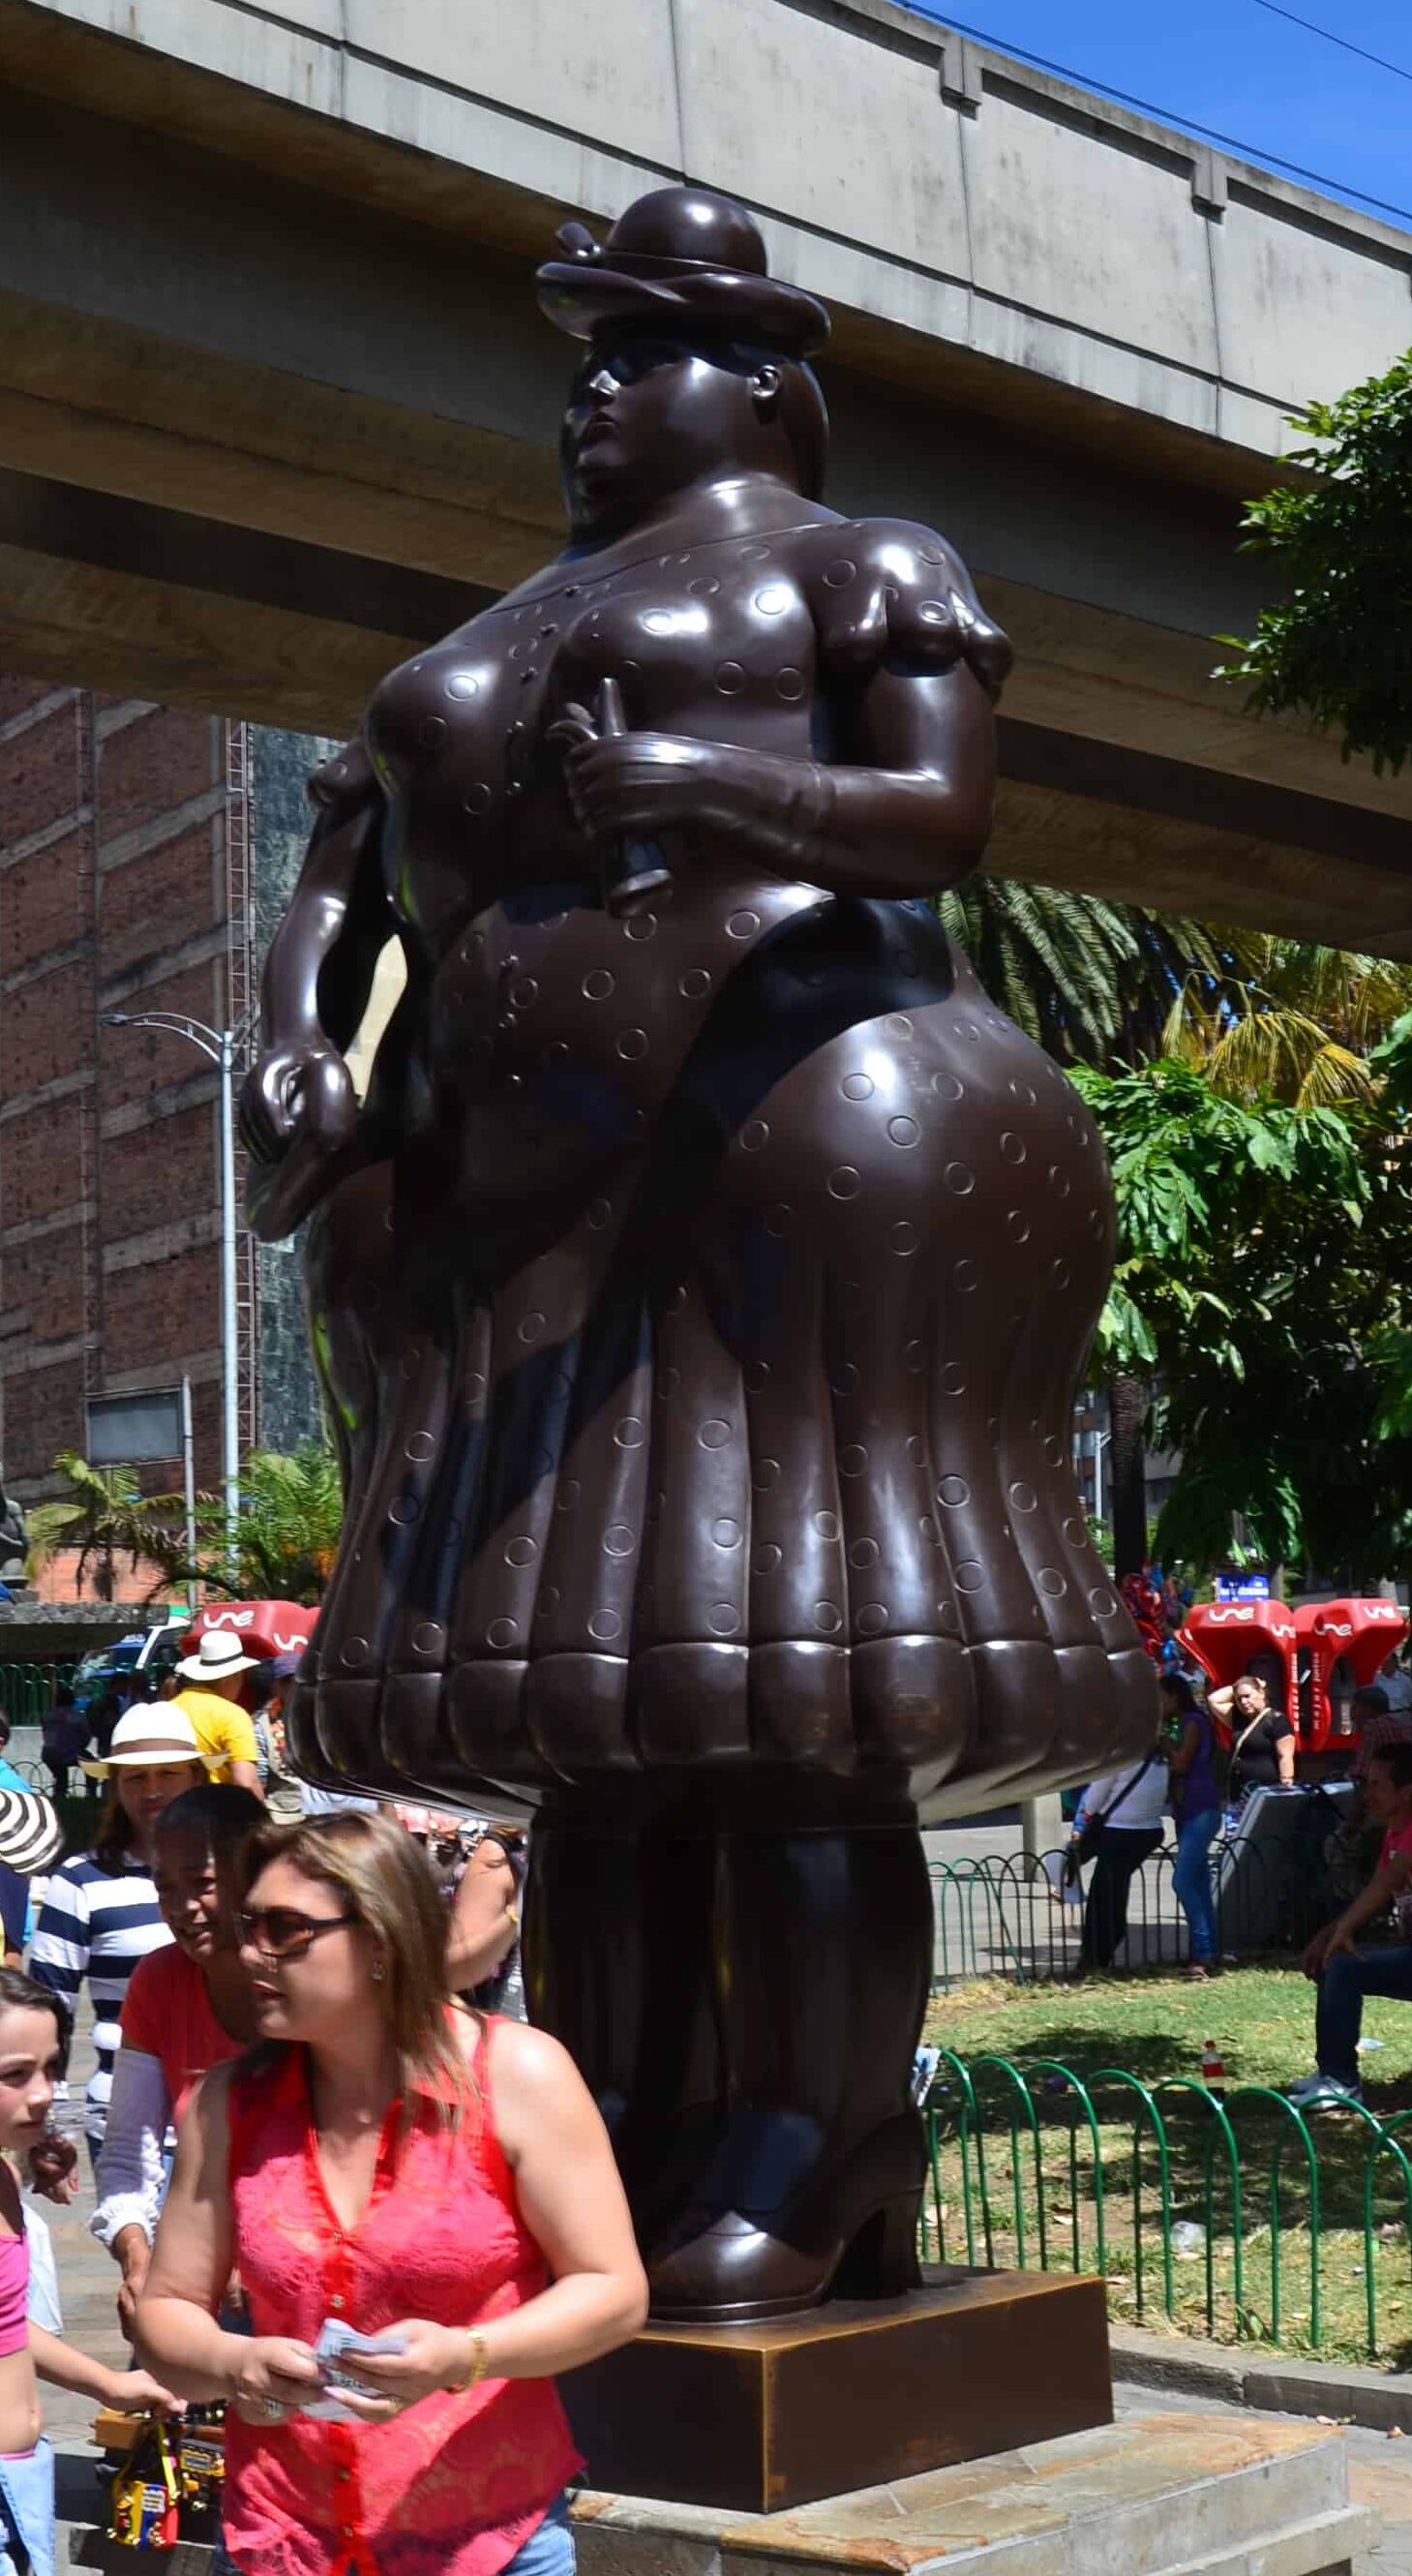 Mujer vestida (Dressed Woman) at Plaza Botero in Medellín, Antioquia, Colombia